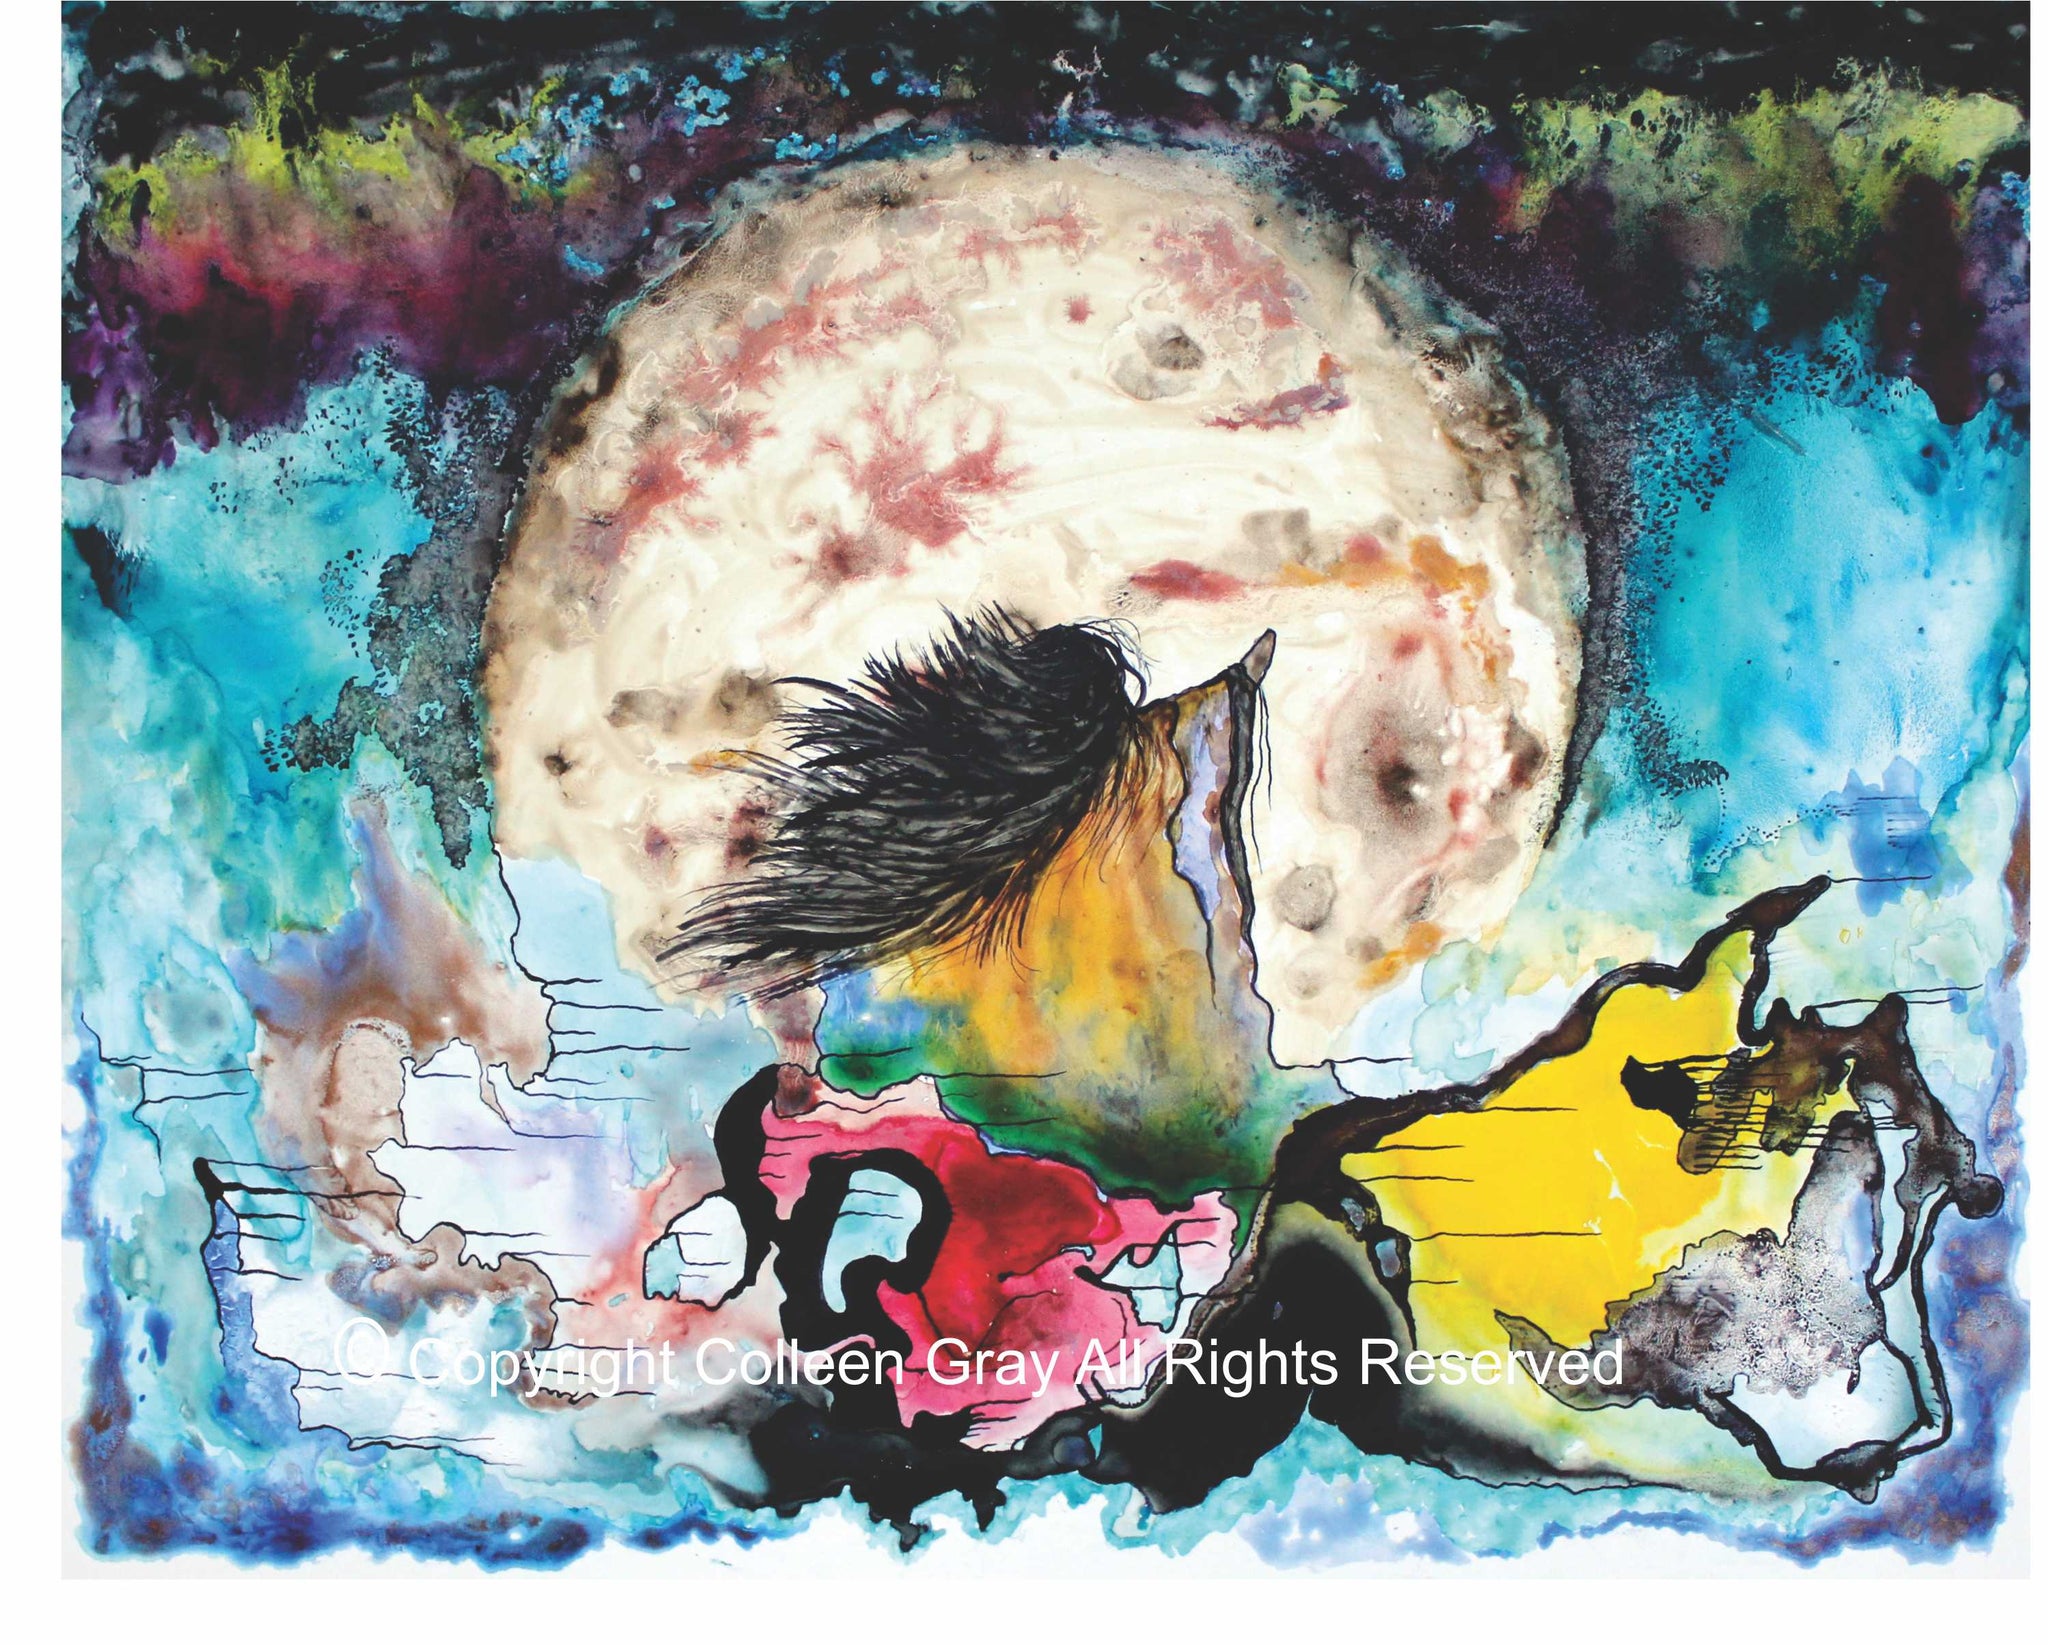 Image of Title: Wizemoon 16x20 archival print by Metis Artist Colleen Gray Indigenous Canadian Art Work. Horizontal. Woman with long flowing hair, outstretched arms, looking at the giant moon seeking wisdom and guidance. For sale at https://artforaidshop.ca